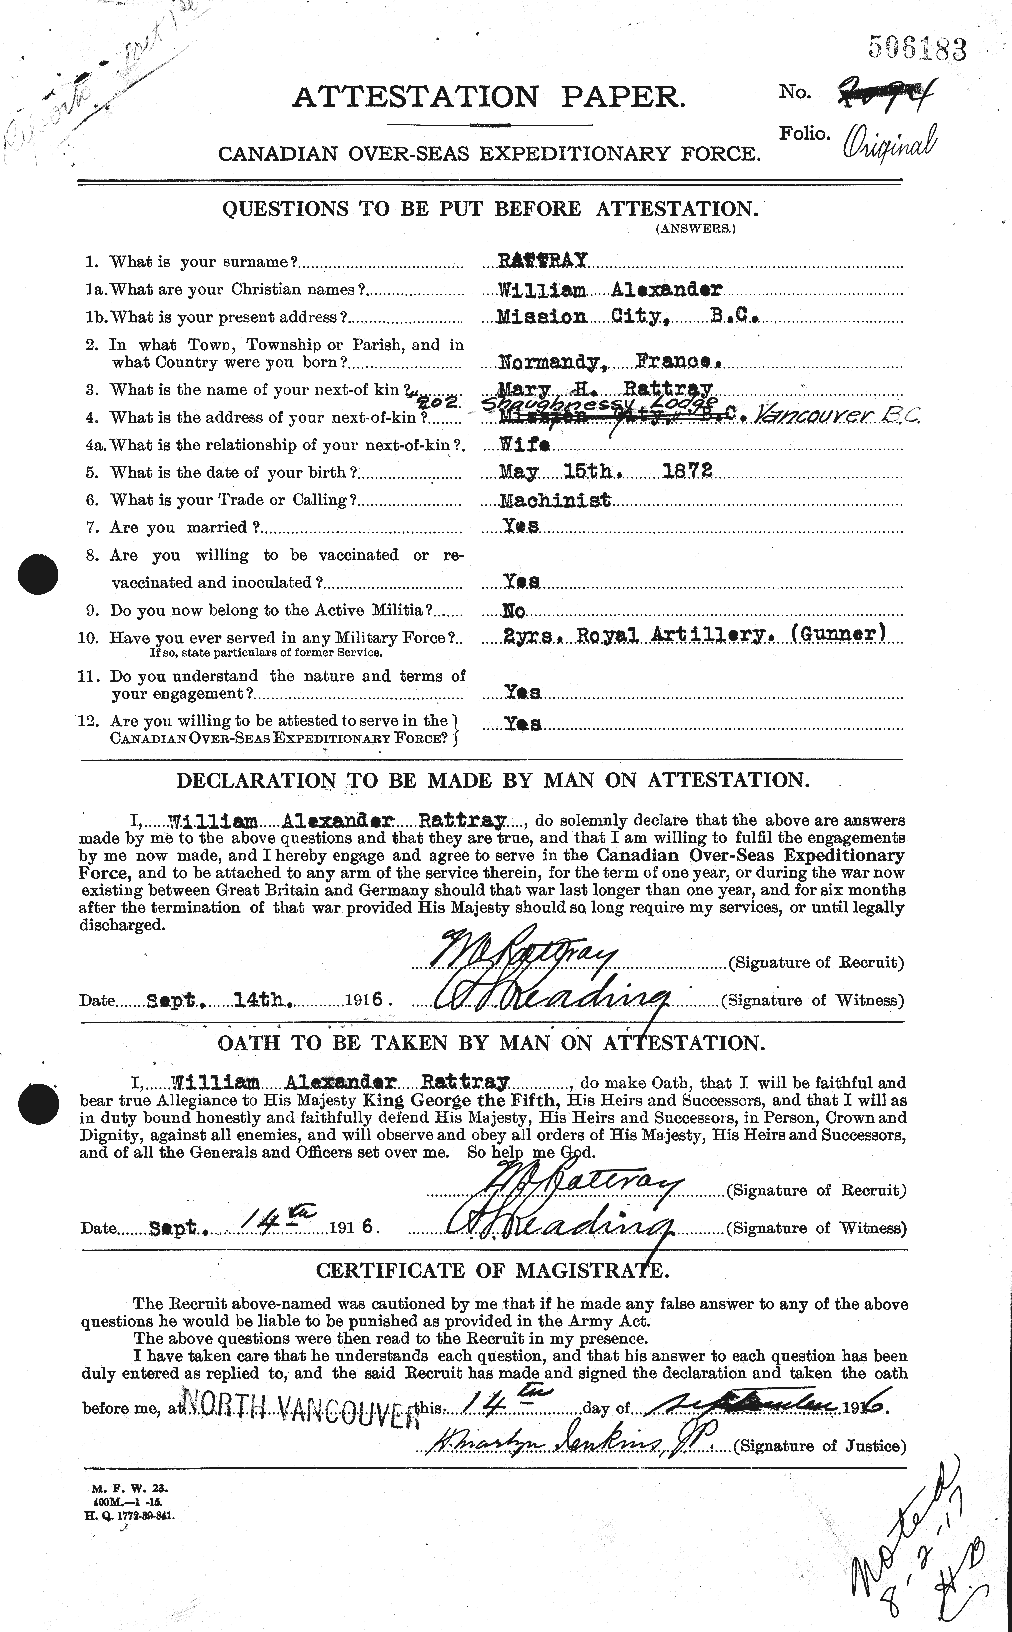 Personnel Records of the First World War - CEF 595709a